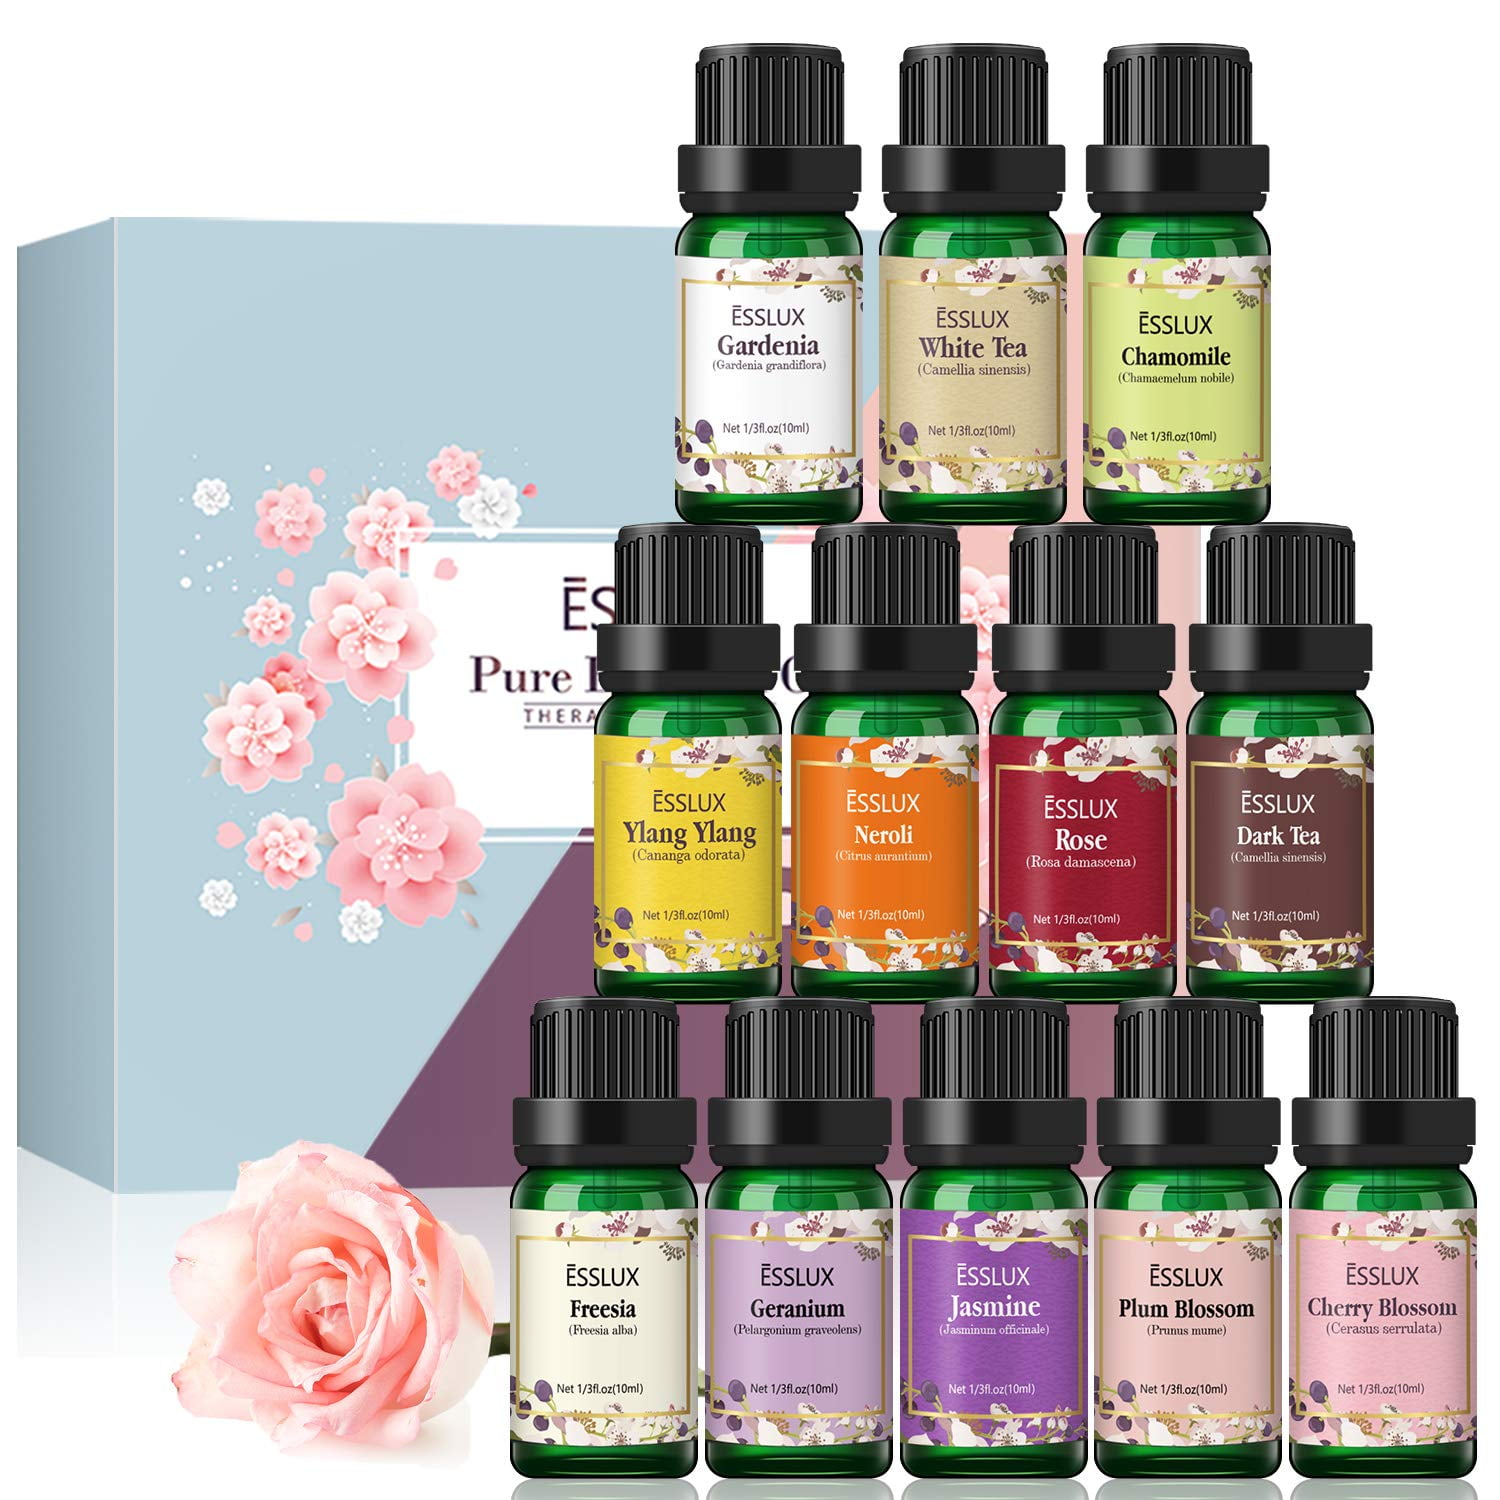 6pcs Aromatherapy Essential Oils for Diffuser Massage Fragrance Oils Rose  Jasmine Ylang Ylang Cherry Blossom Gardenia White Tea - AliExpress